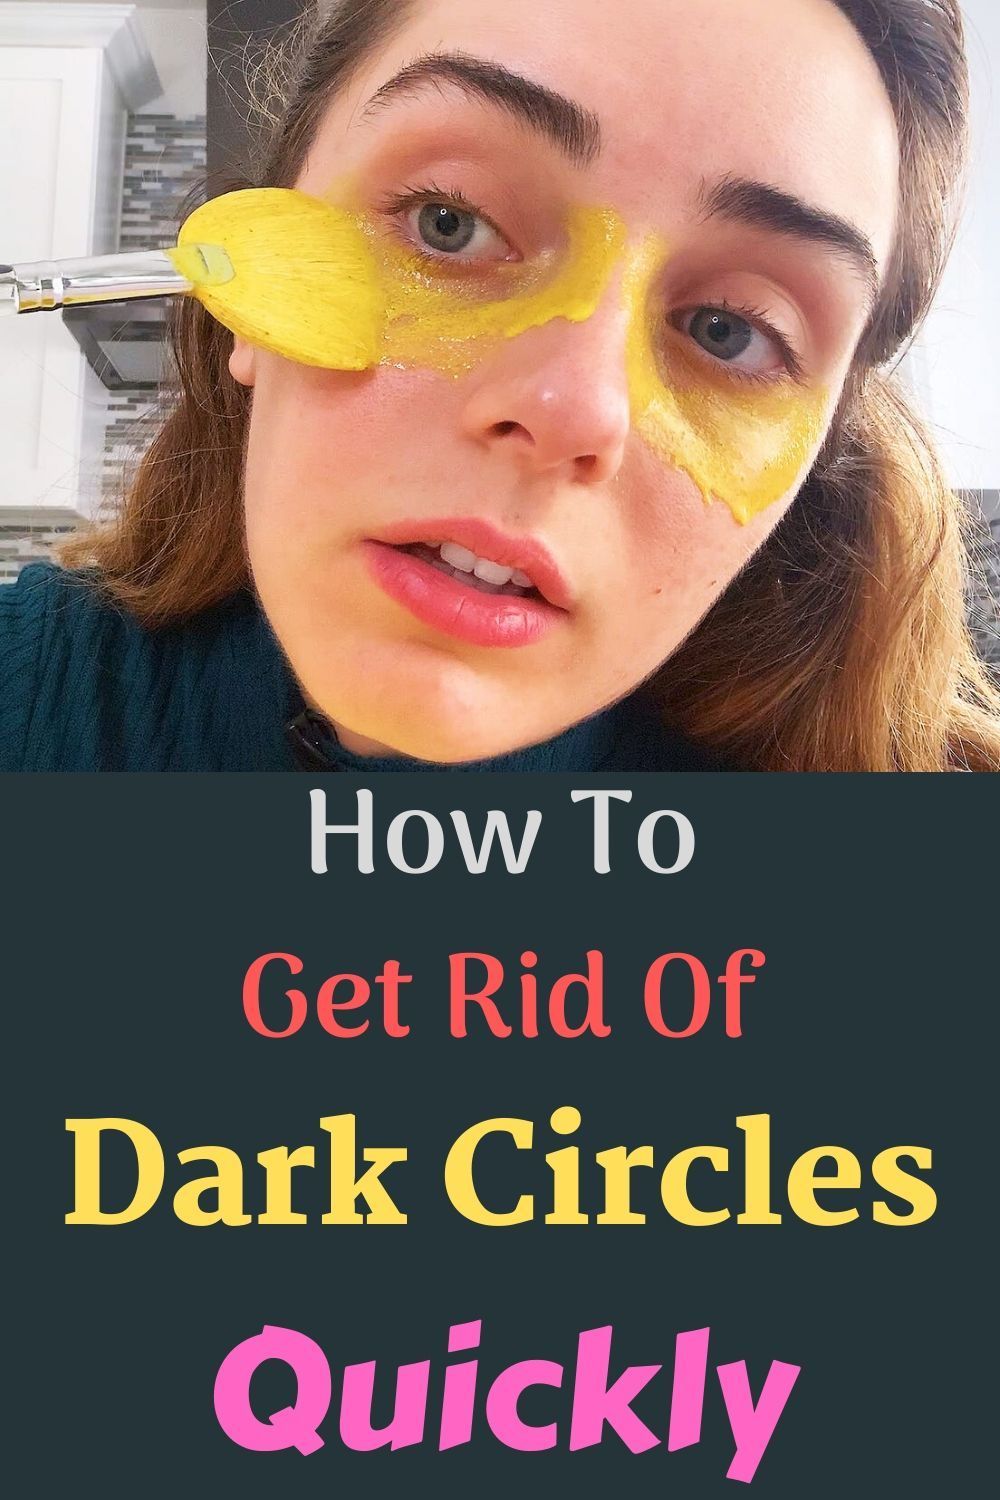 How To Get Rid Of Dark Circles Quickly -   18 how to get rid of dark circles under eye ideas